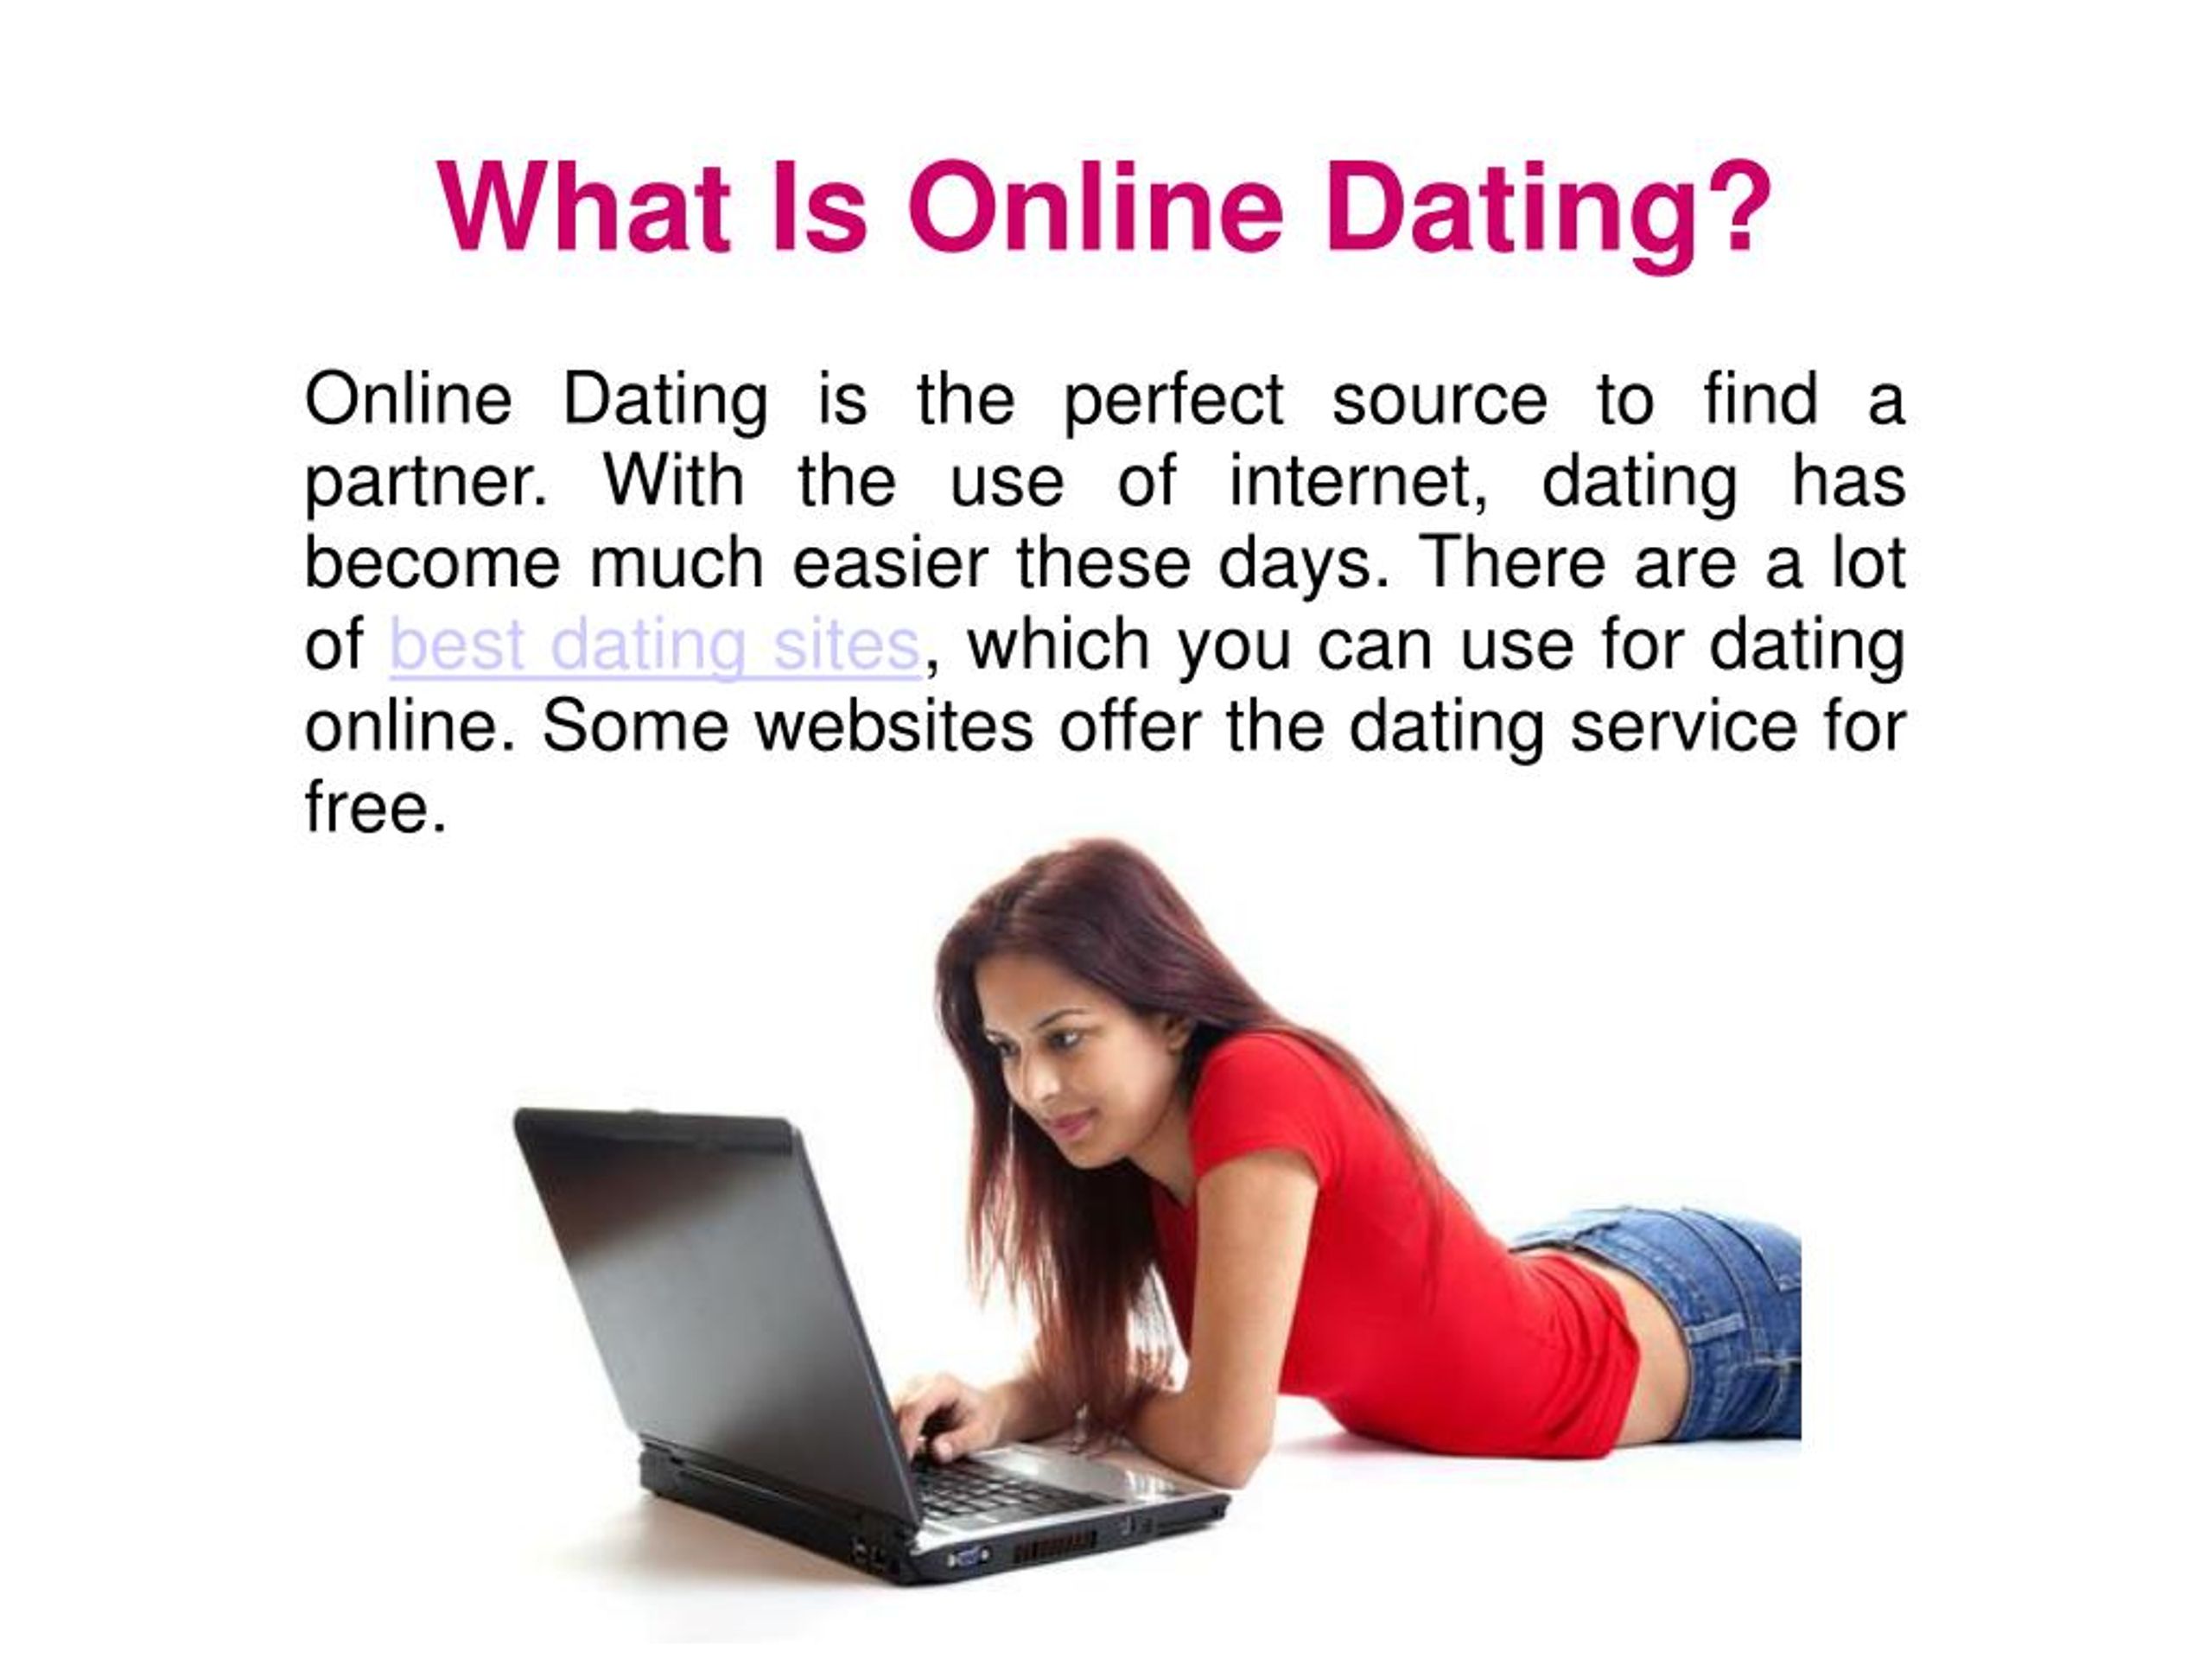 how often does online dating work